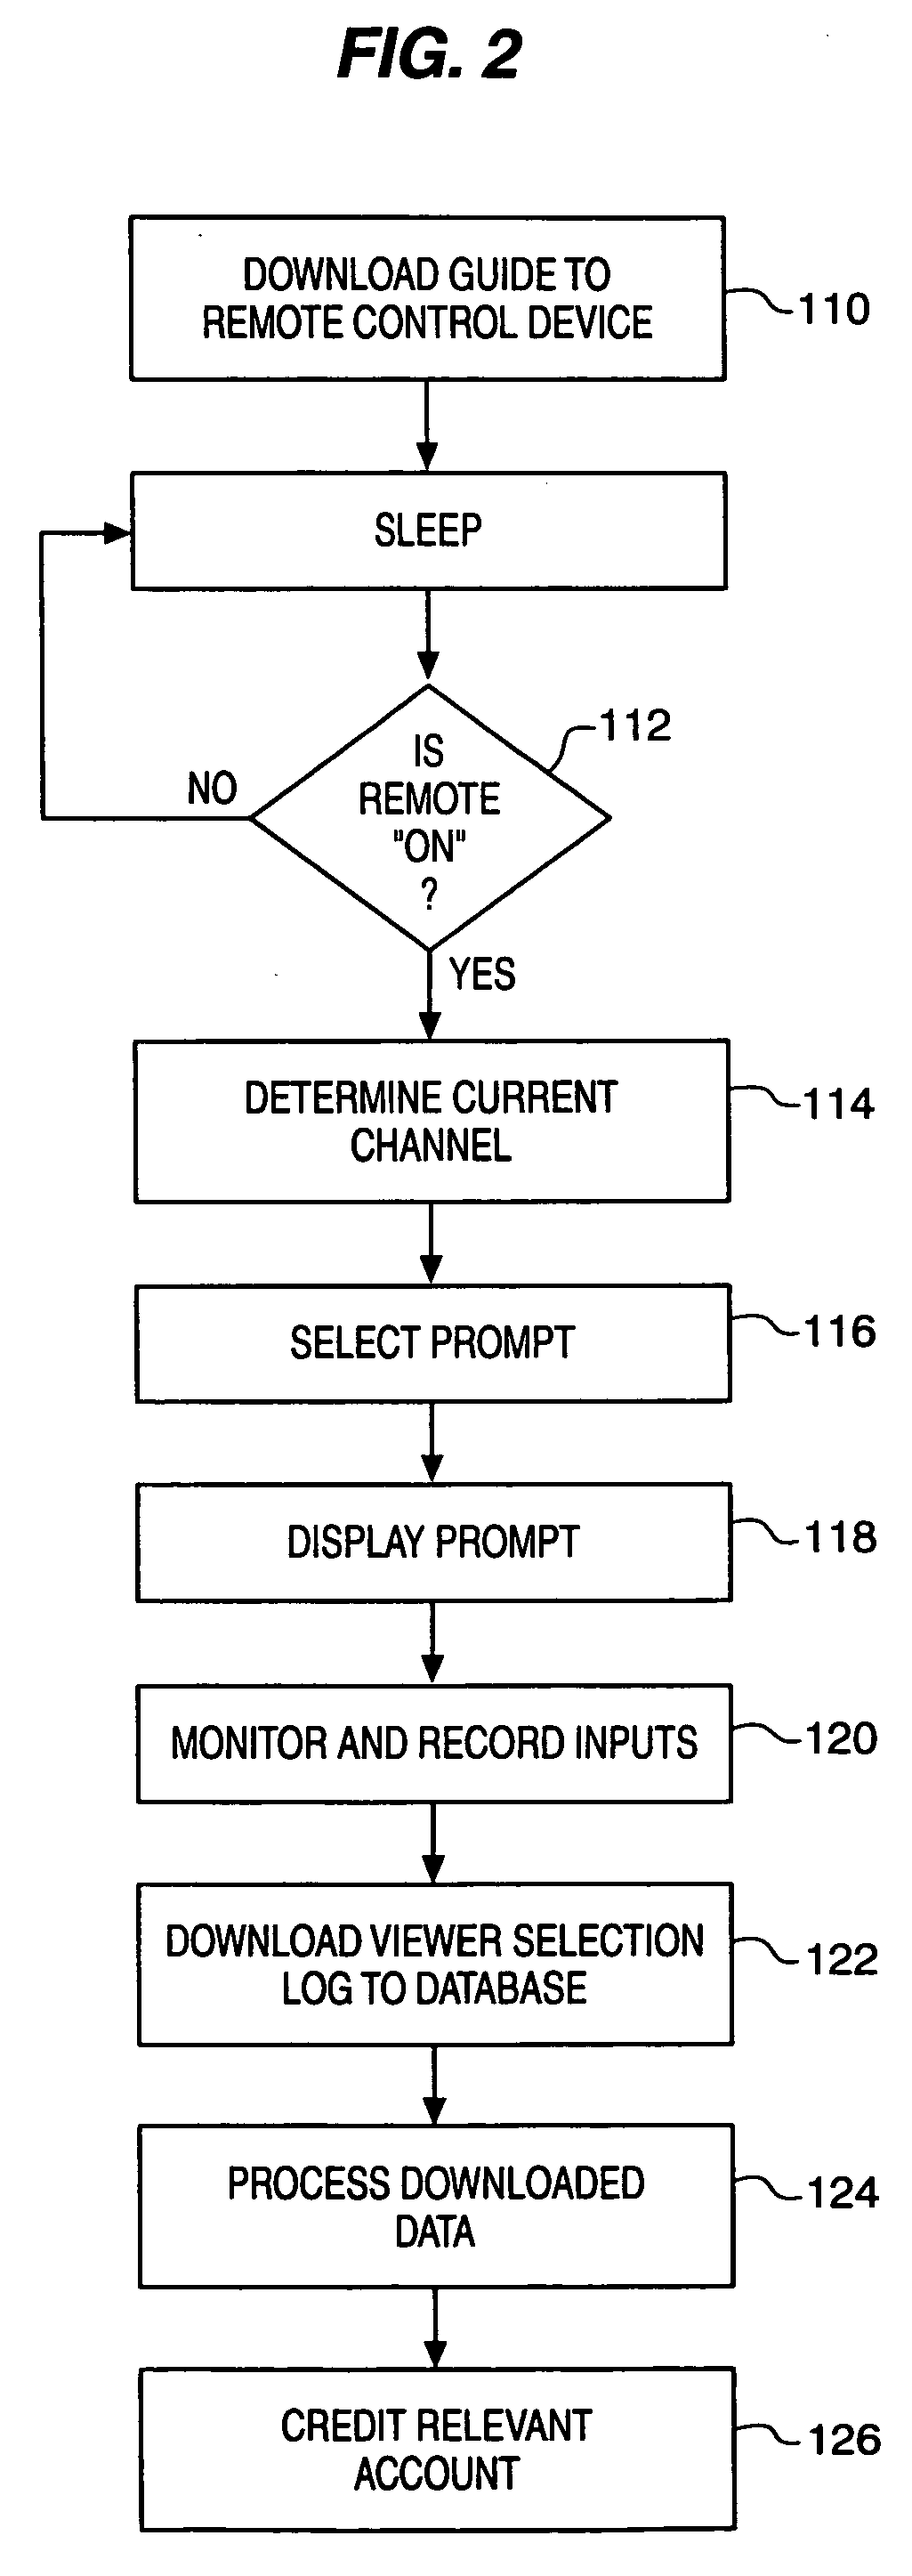 Systems and methods for awarding affinity points based upon remote control usage